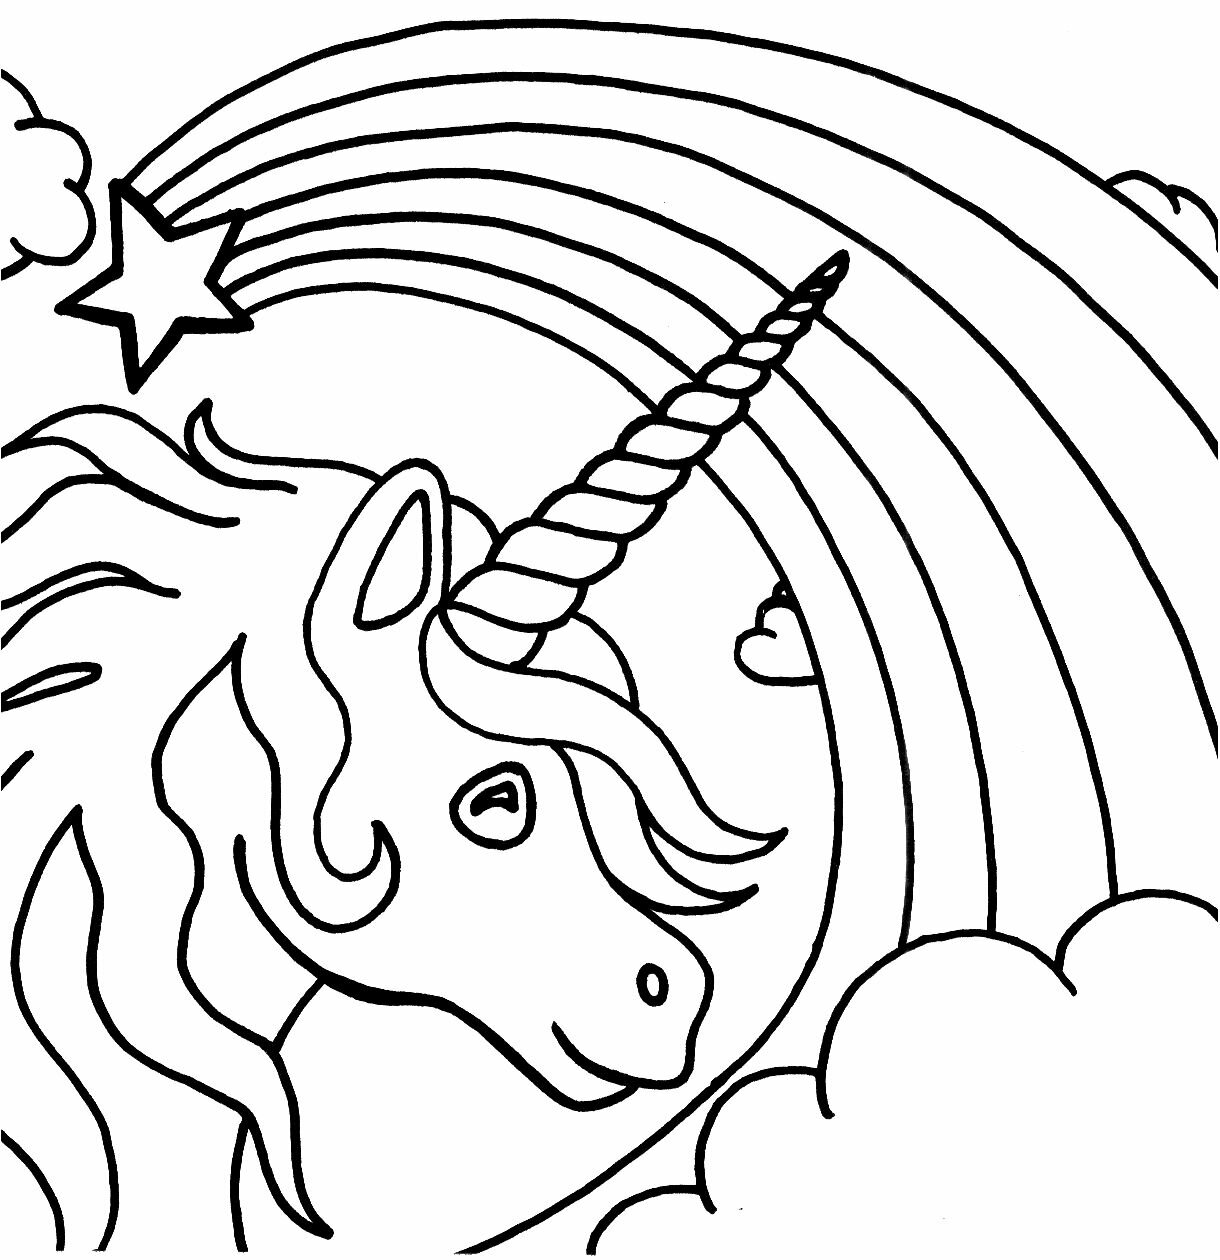 marvelous coloring pages for kids unicorn ender free halloween coloring pages for children 